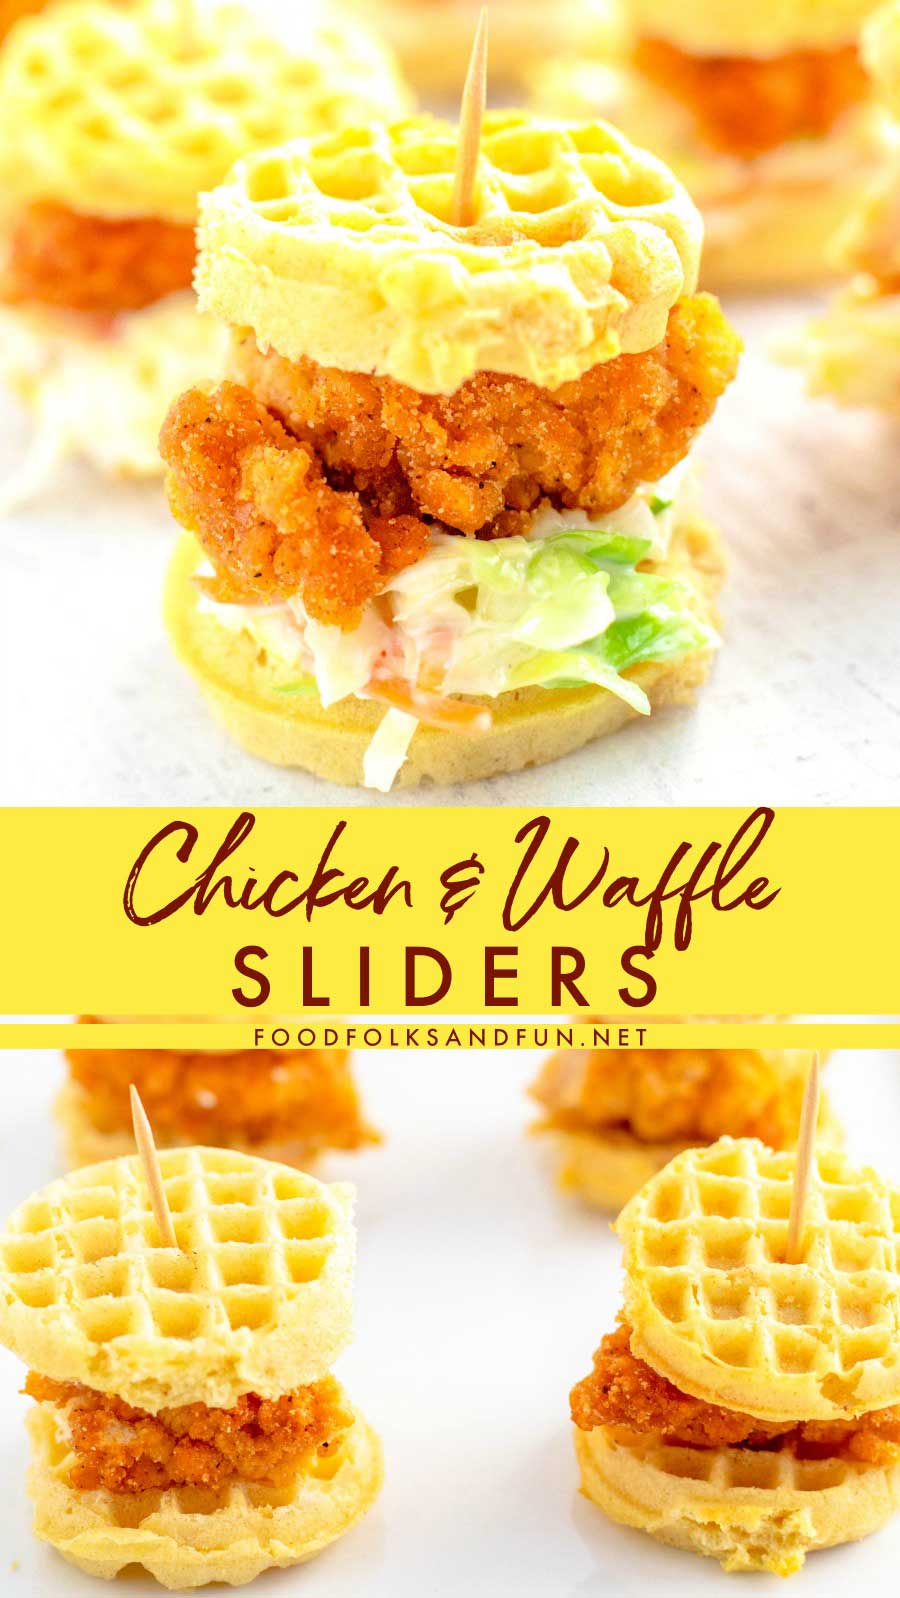 These Chicken and Waffle Sliders are the easiest game day, Super Bowl, or party food recipe that you will make! They're quick & easy to make and they're always a crowd pleaser. via @foodfolksandfun